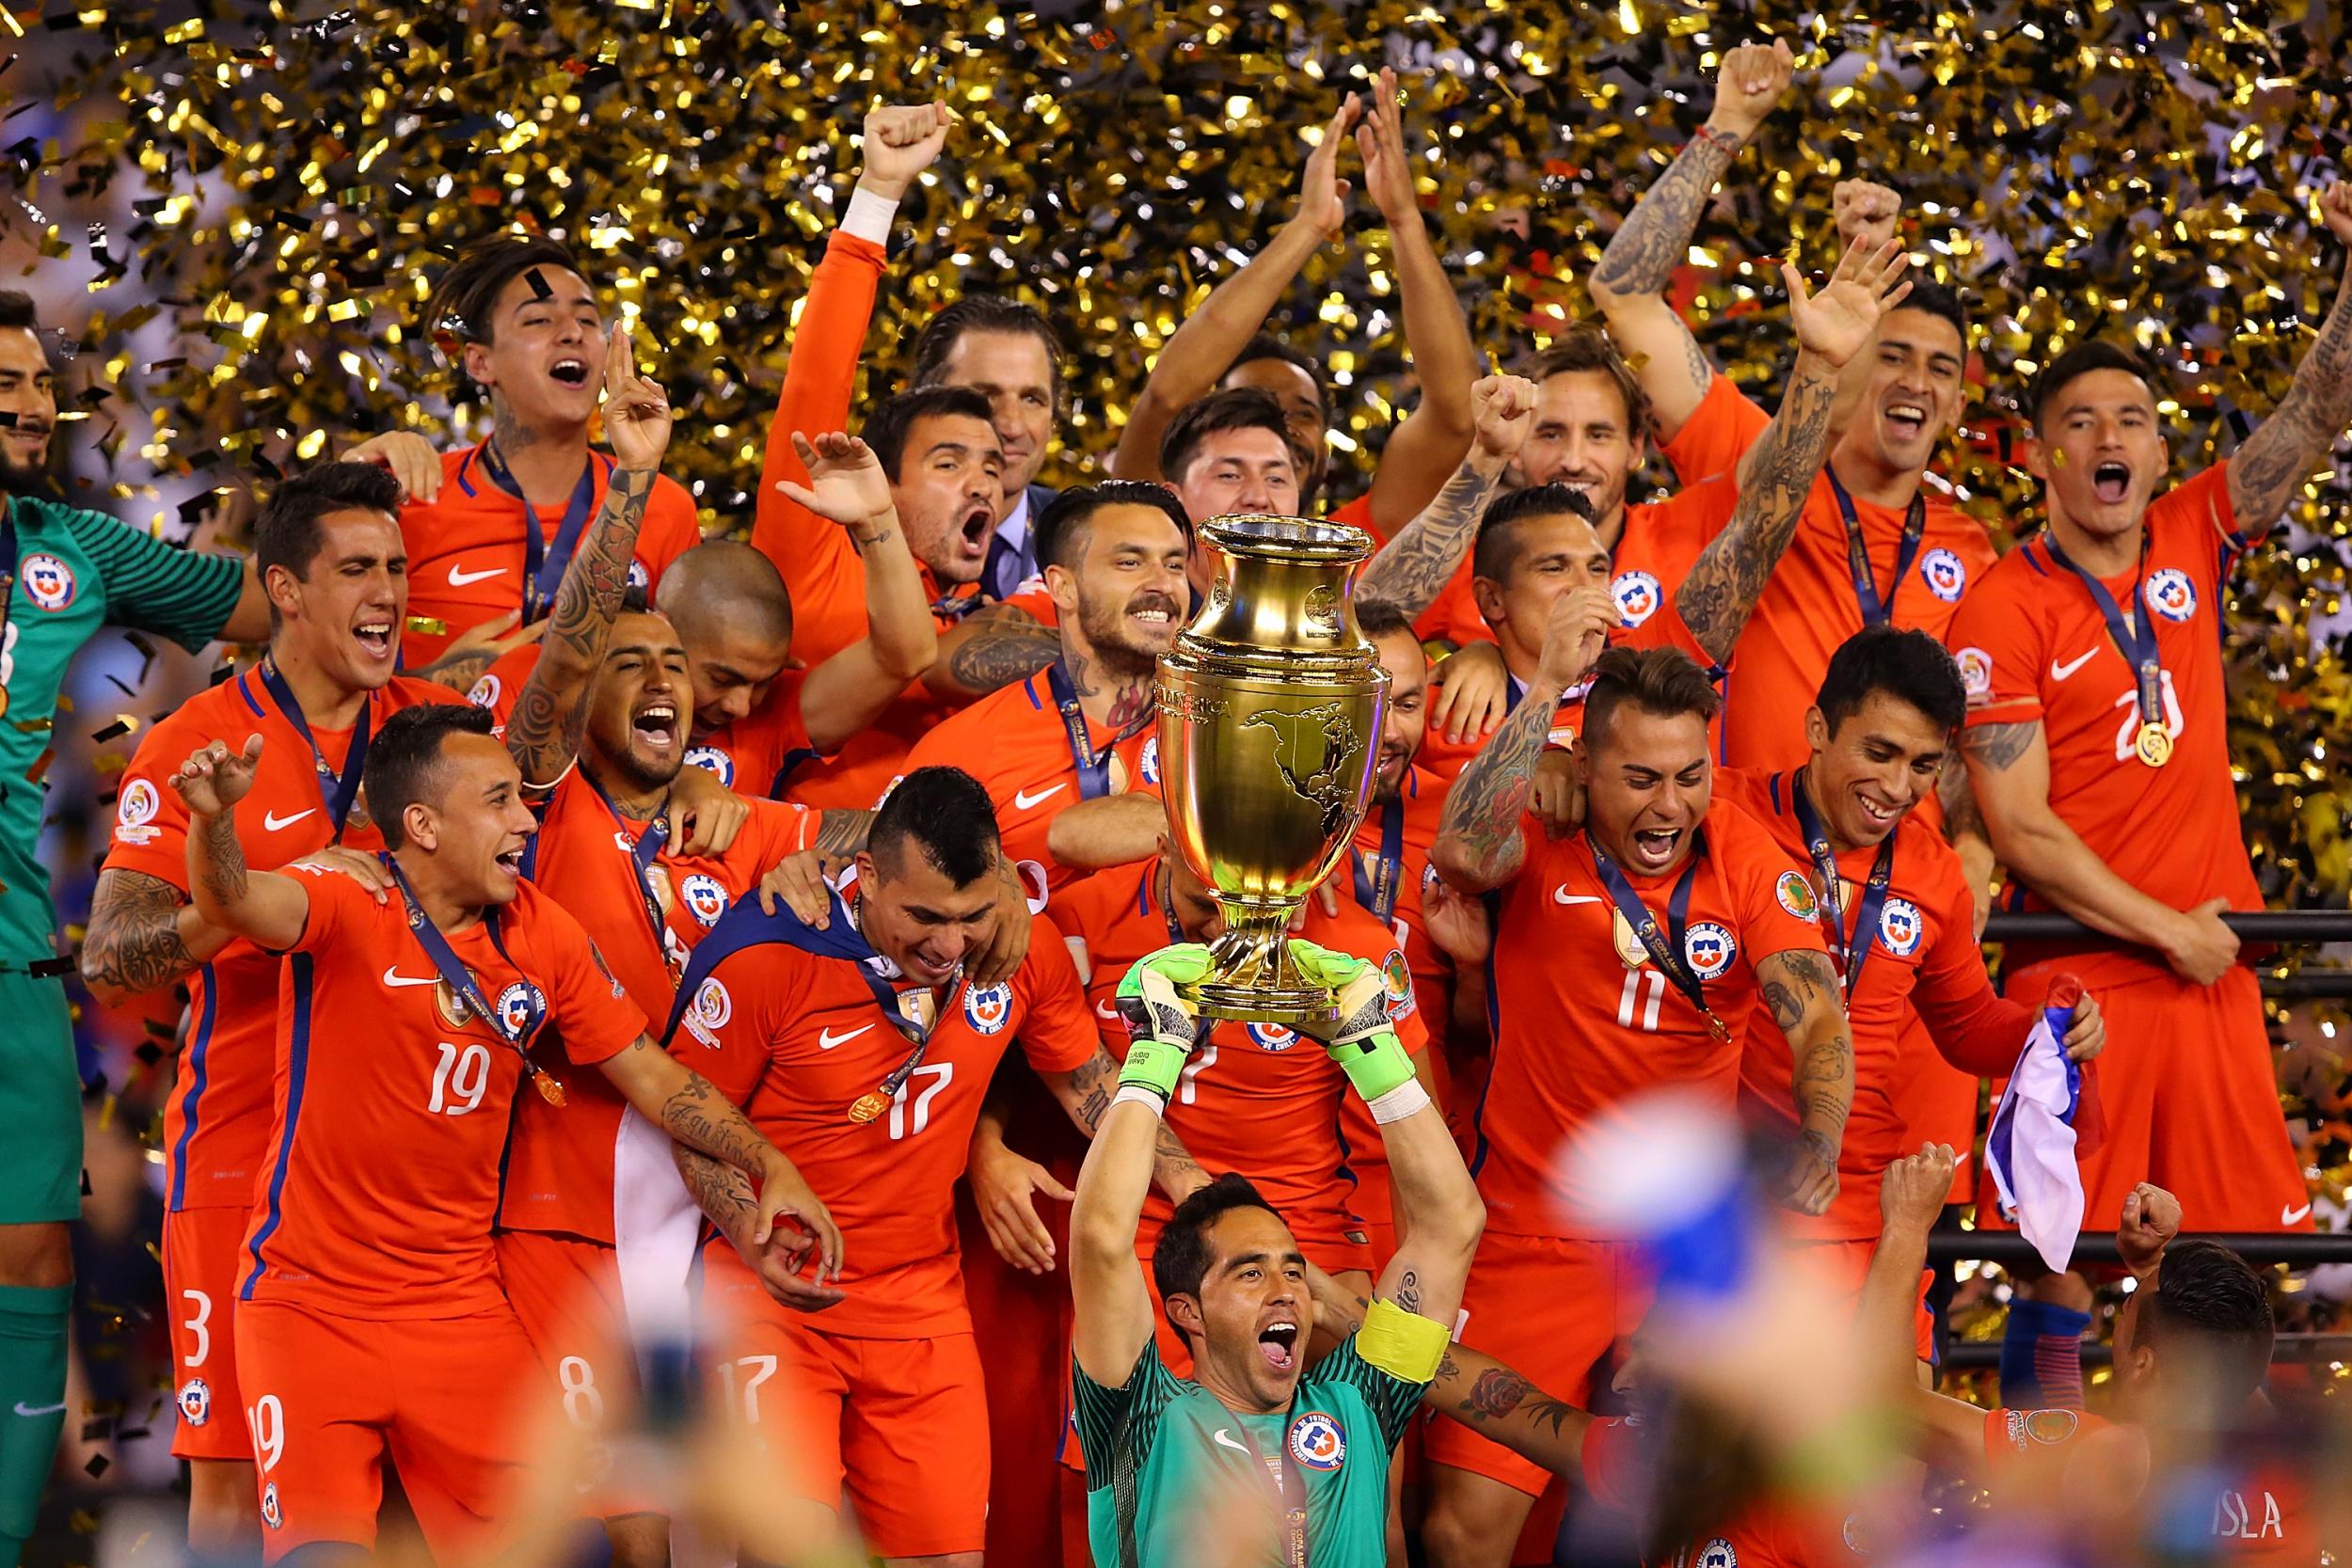 2019 CONMEBOL Copa América Teams & Squads - Everything you need to